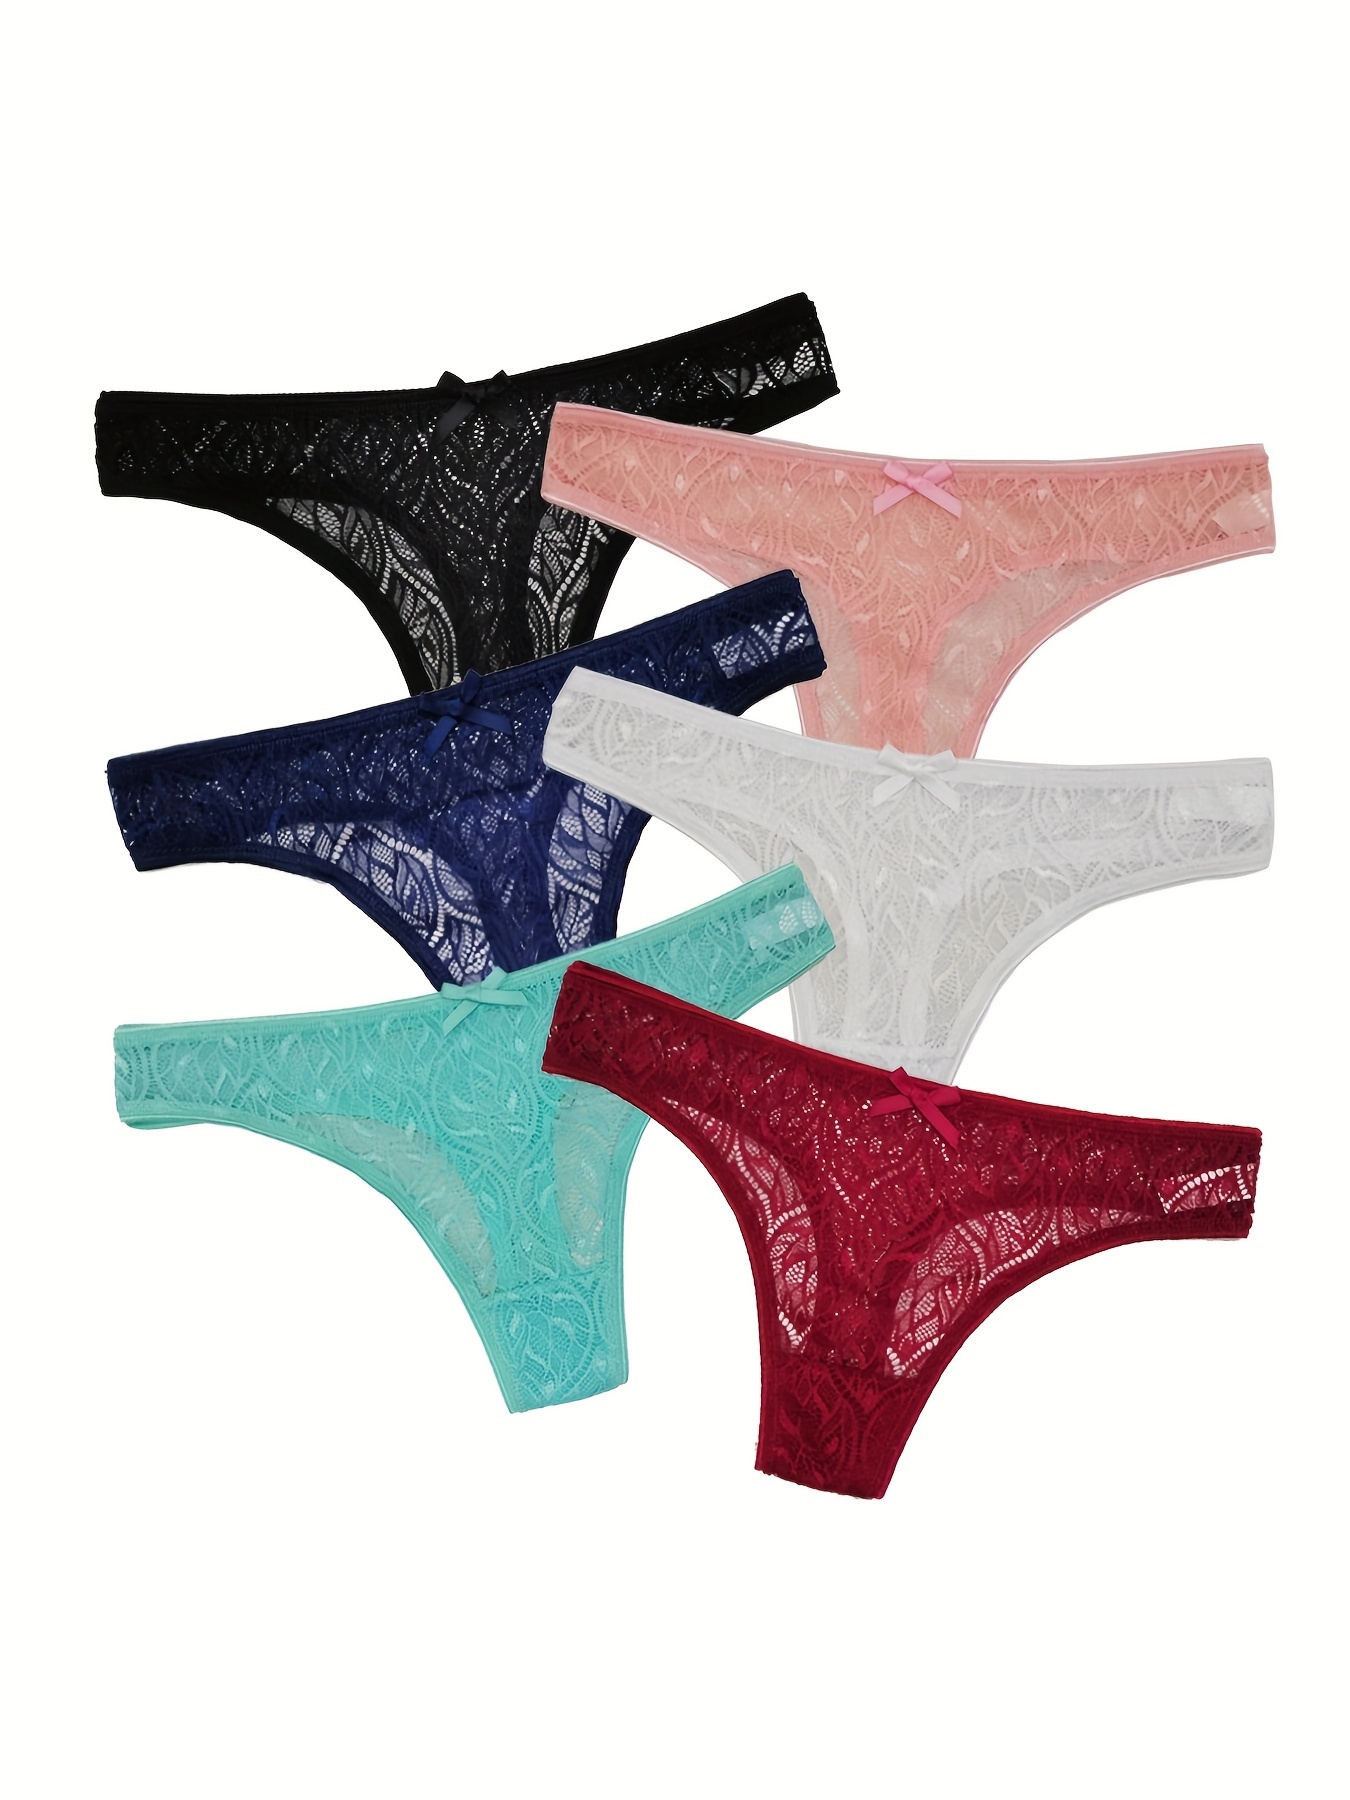 6pcs/pack Ladies' T-back Lace Panties With High Slits, Women's